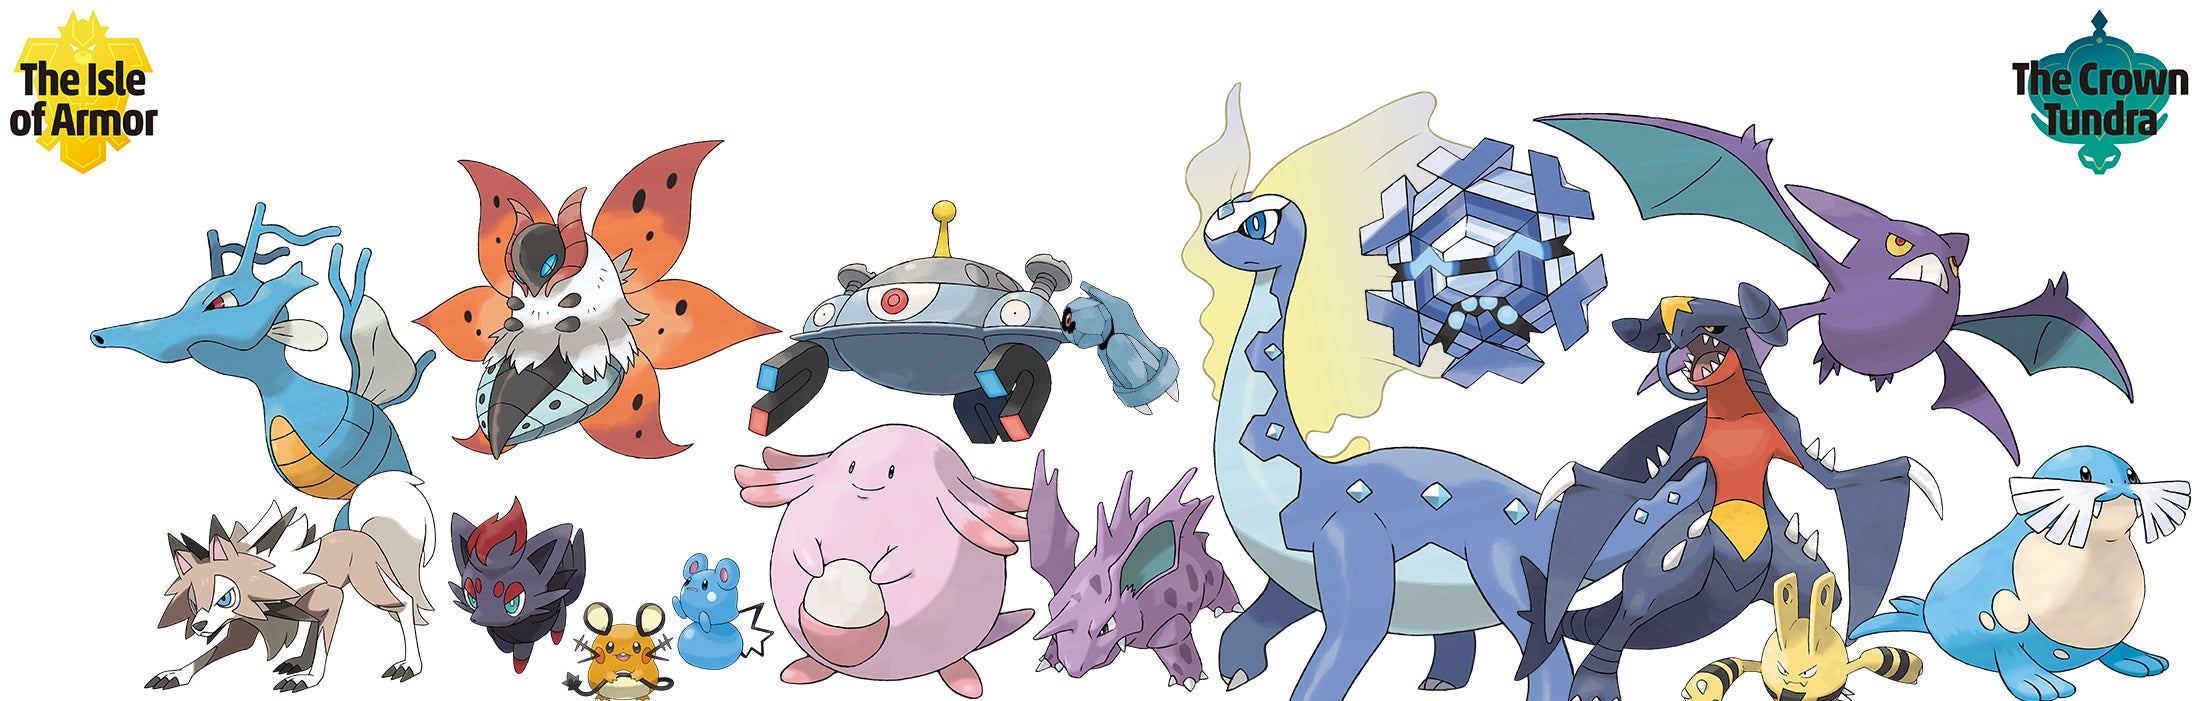 Image for Pokemon Sword and Shield's The Isle of Armor Expansion - new details, releasing at the end of June